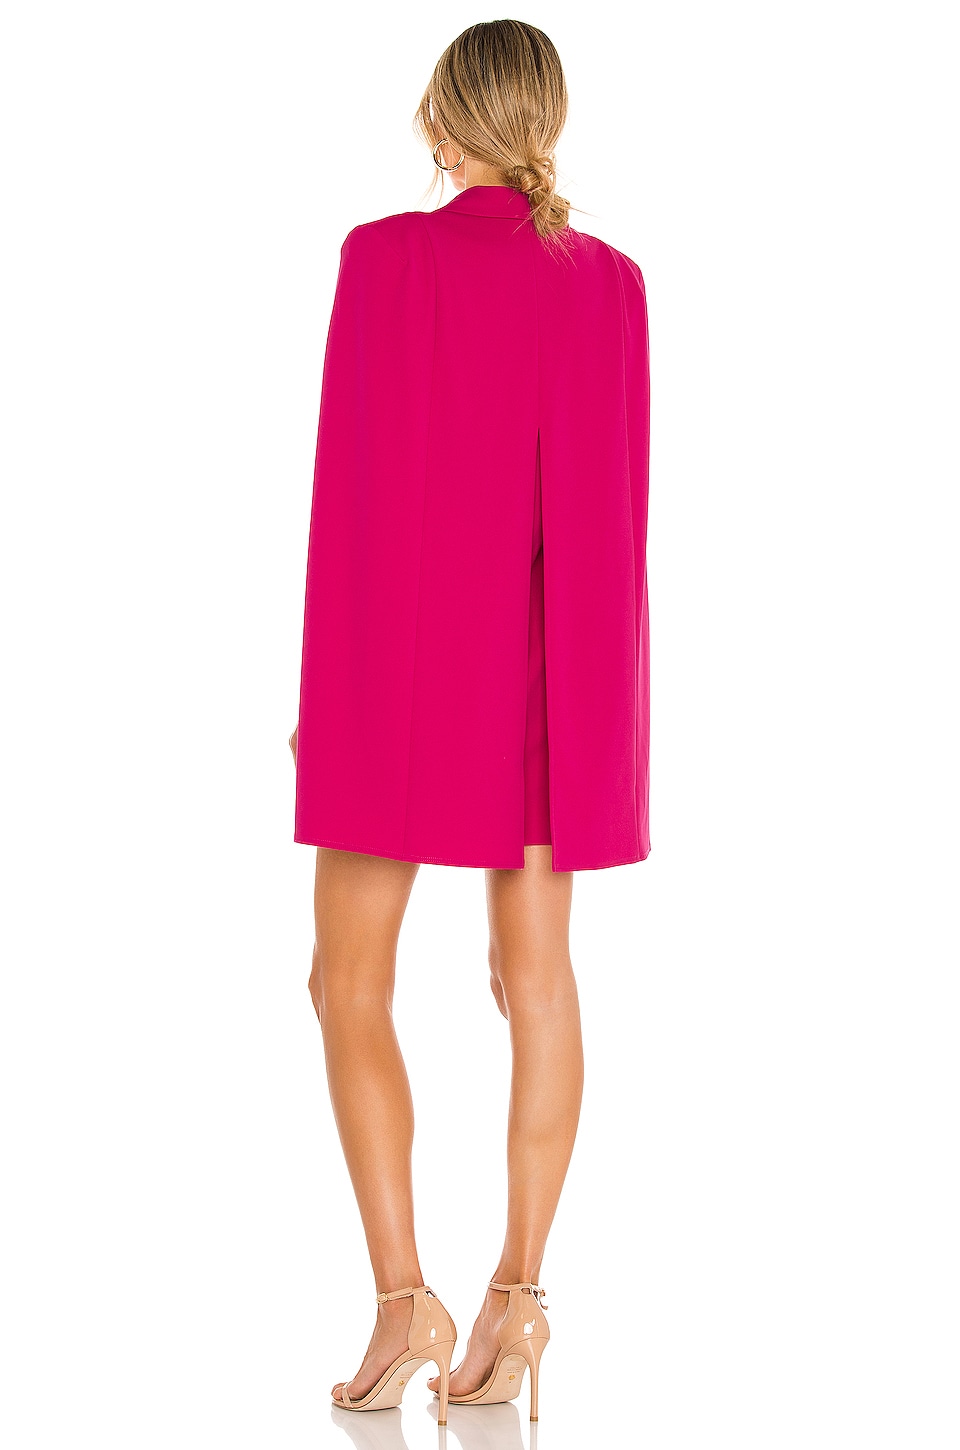 Katie May Boss Lady Dress in Pink Peacock | REVOLVE